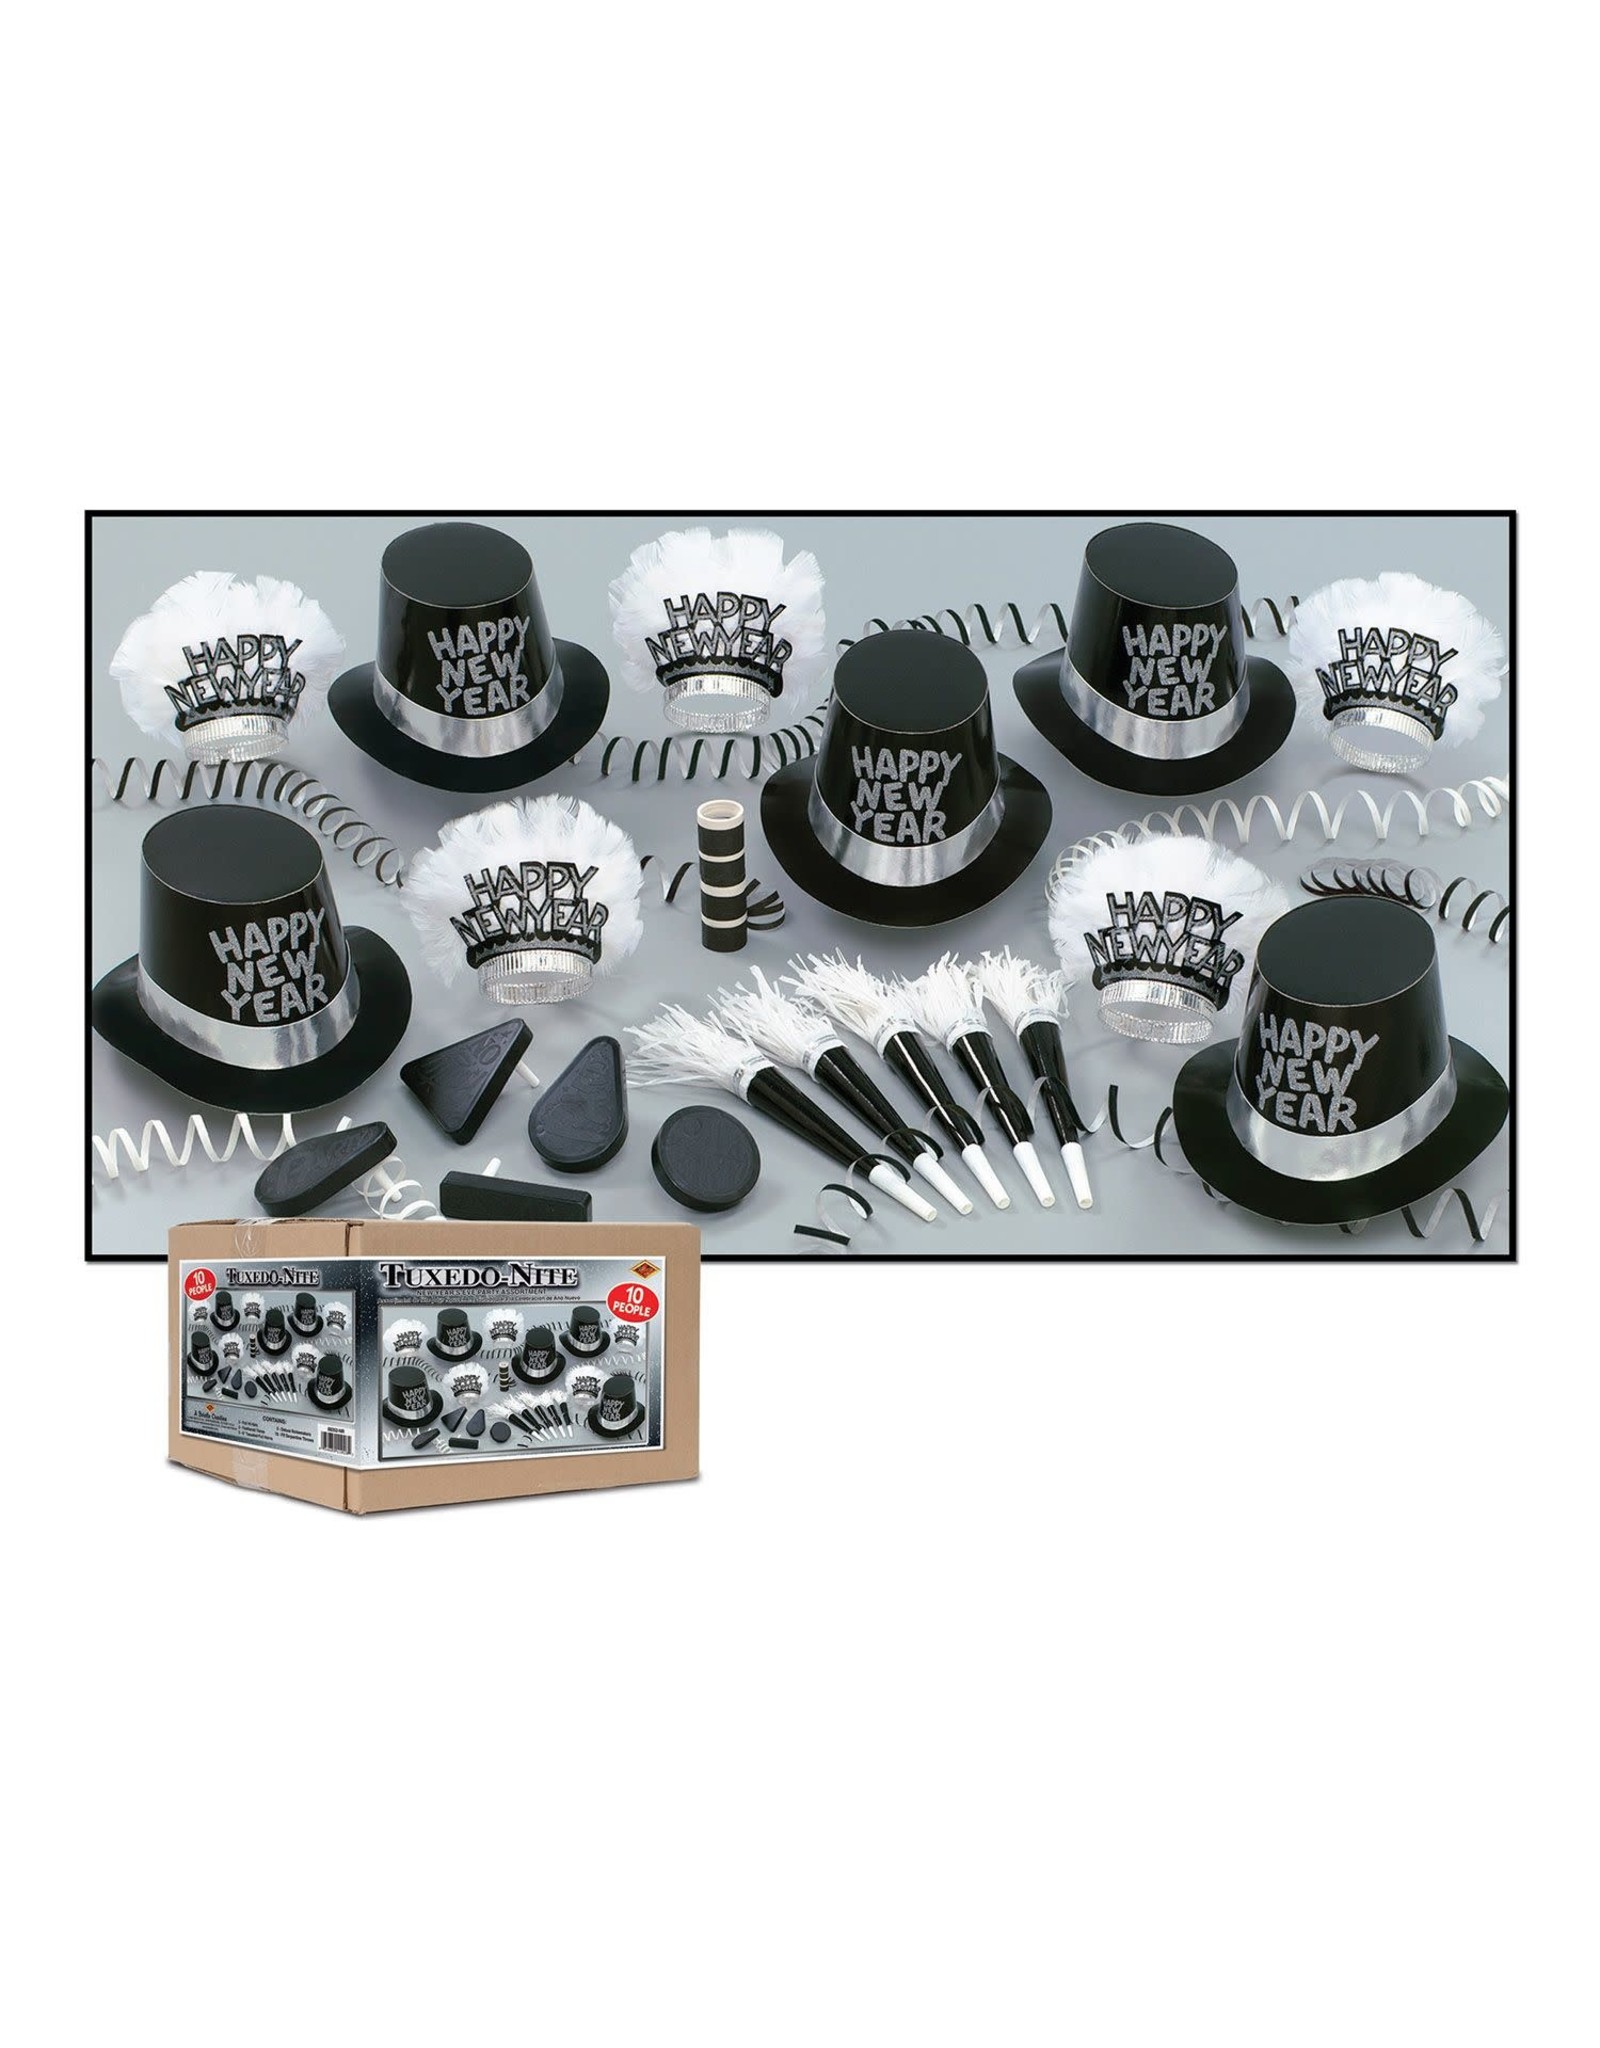 Beistle Tuxedo-Nite Happy New Year Party Supplies Set For 10 People